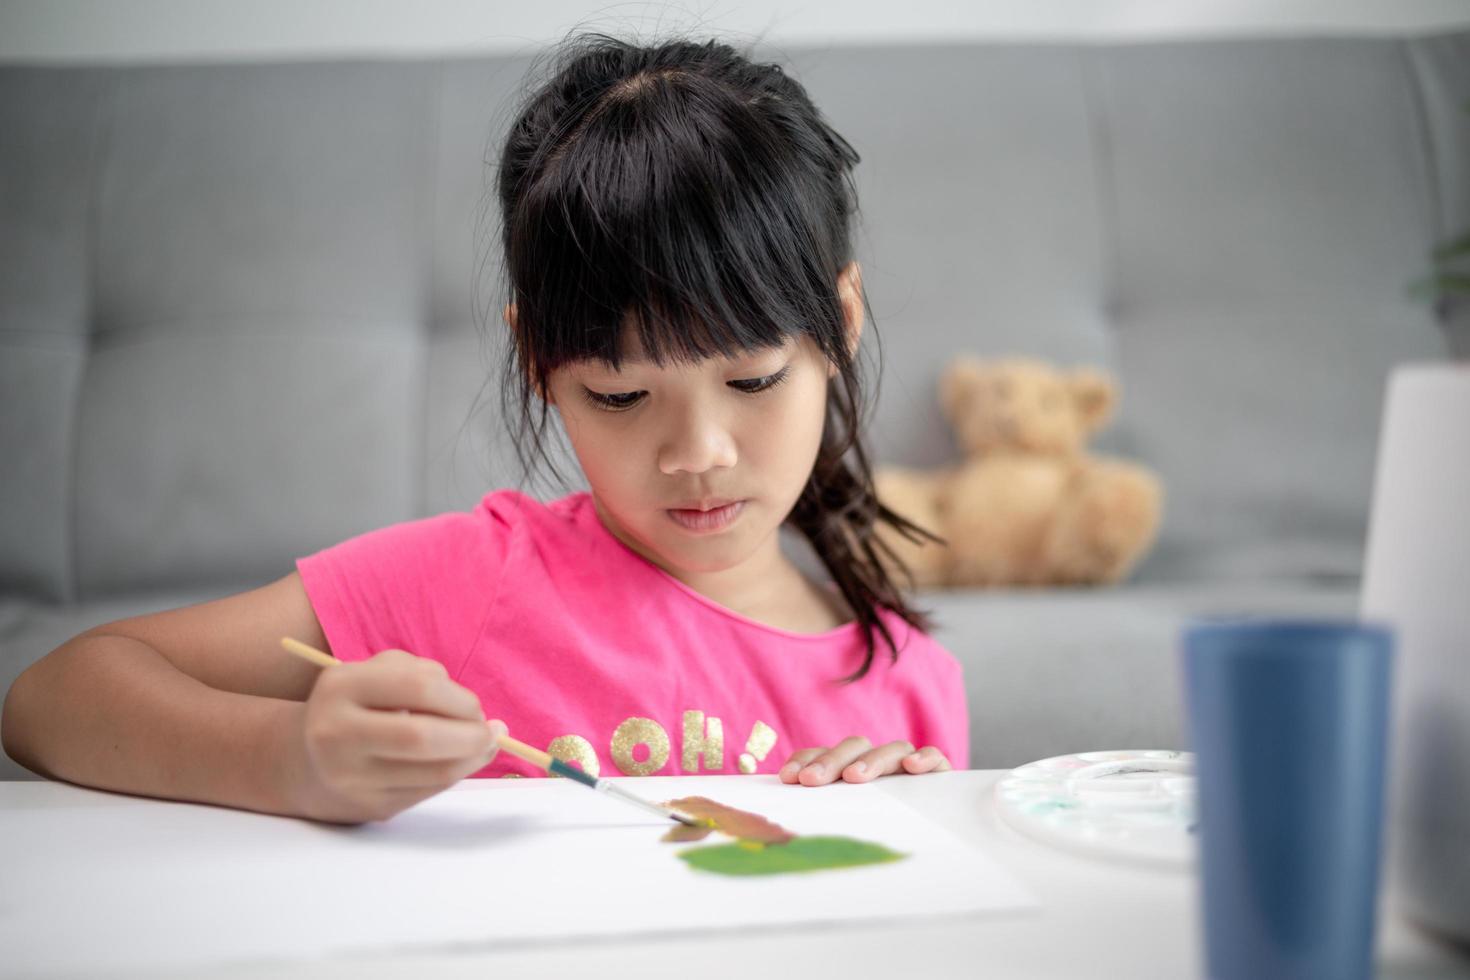 Girl Painting Picture On Table At Home photo